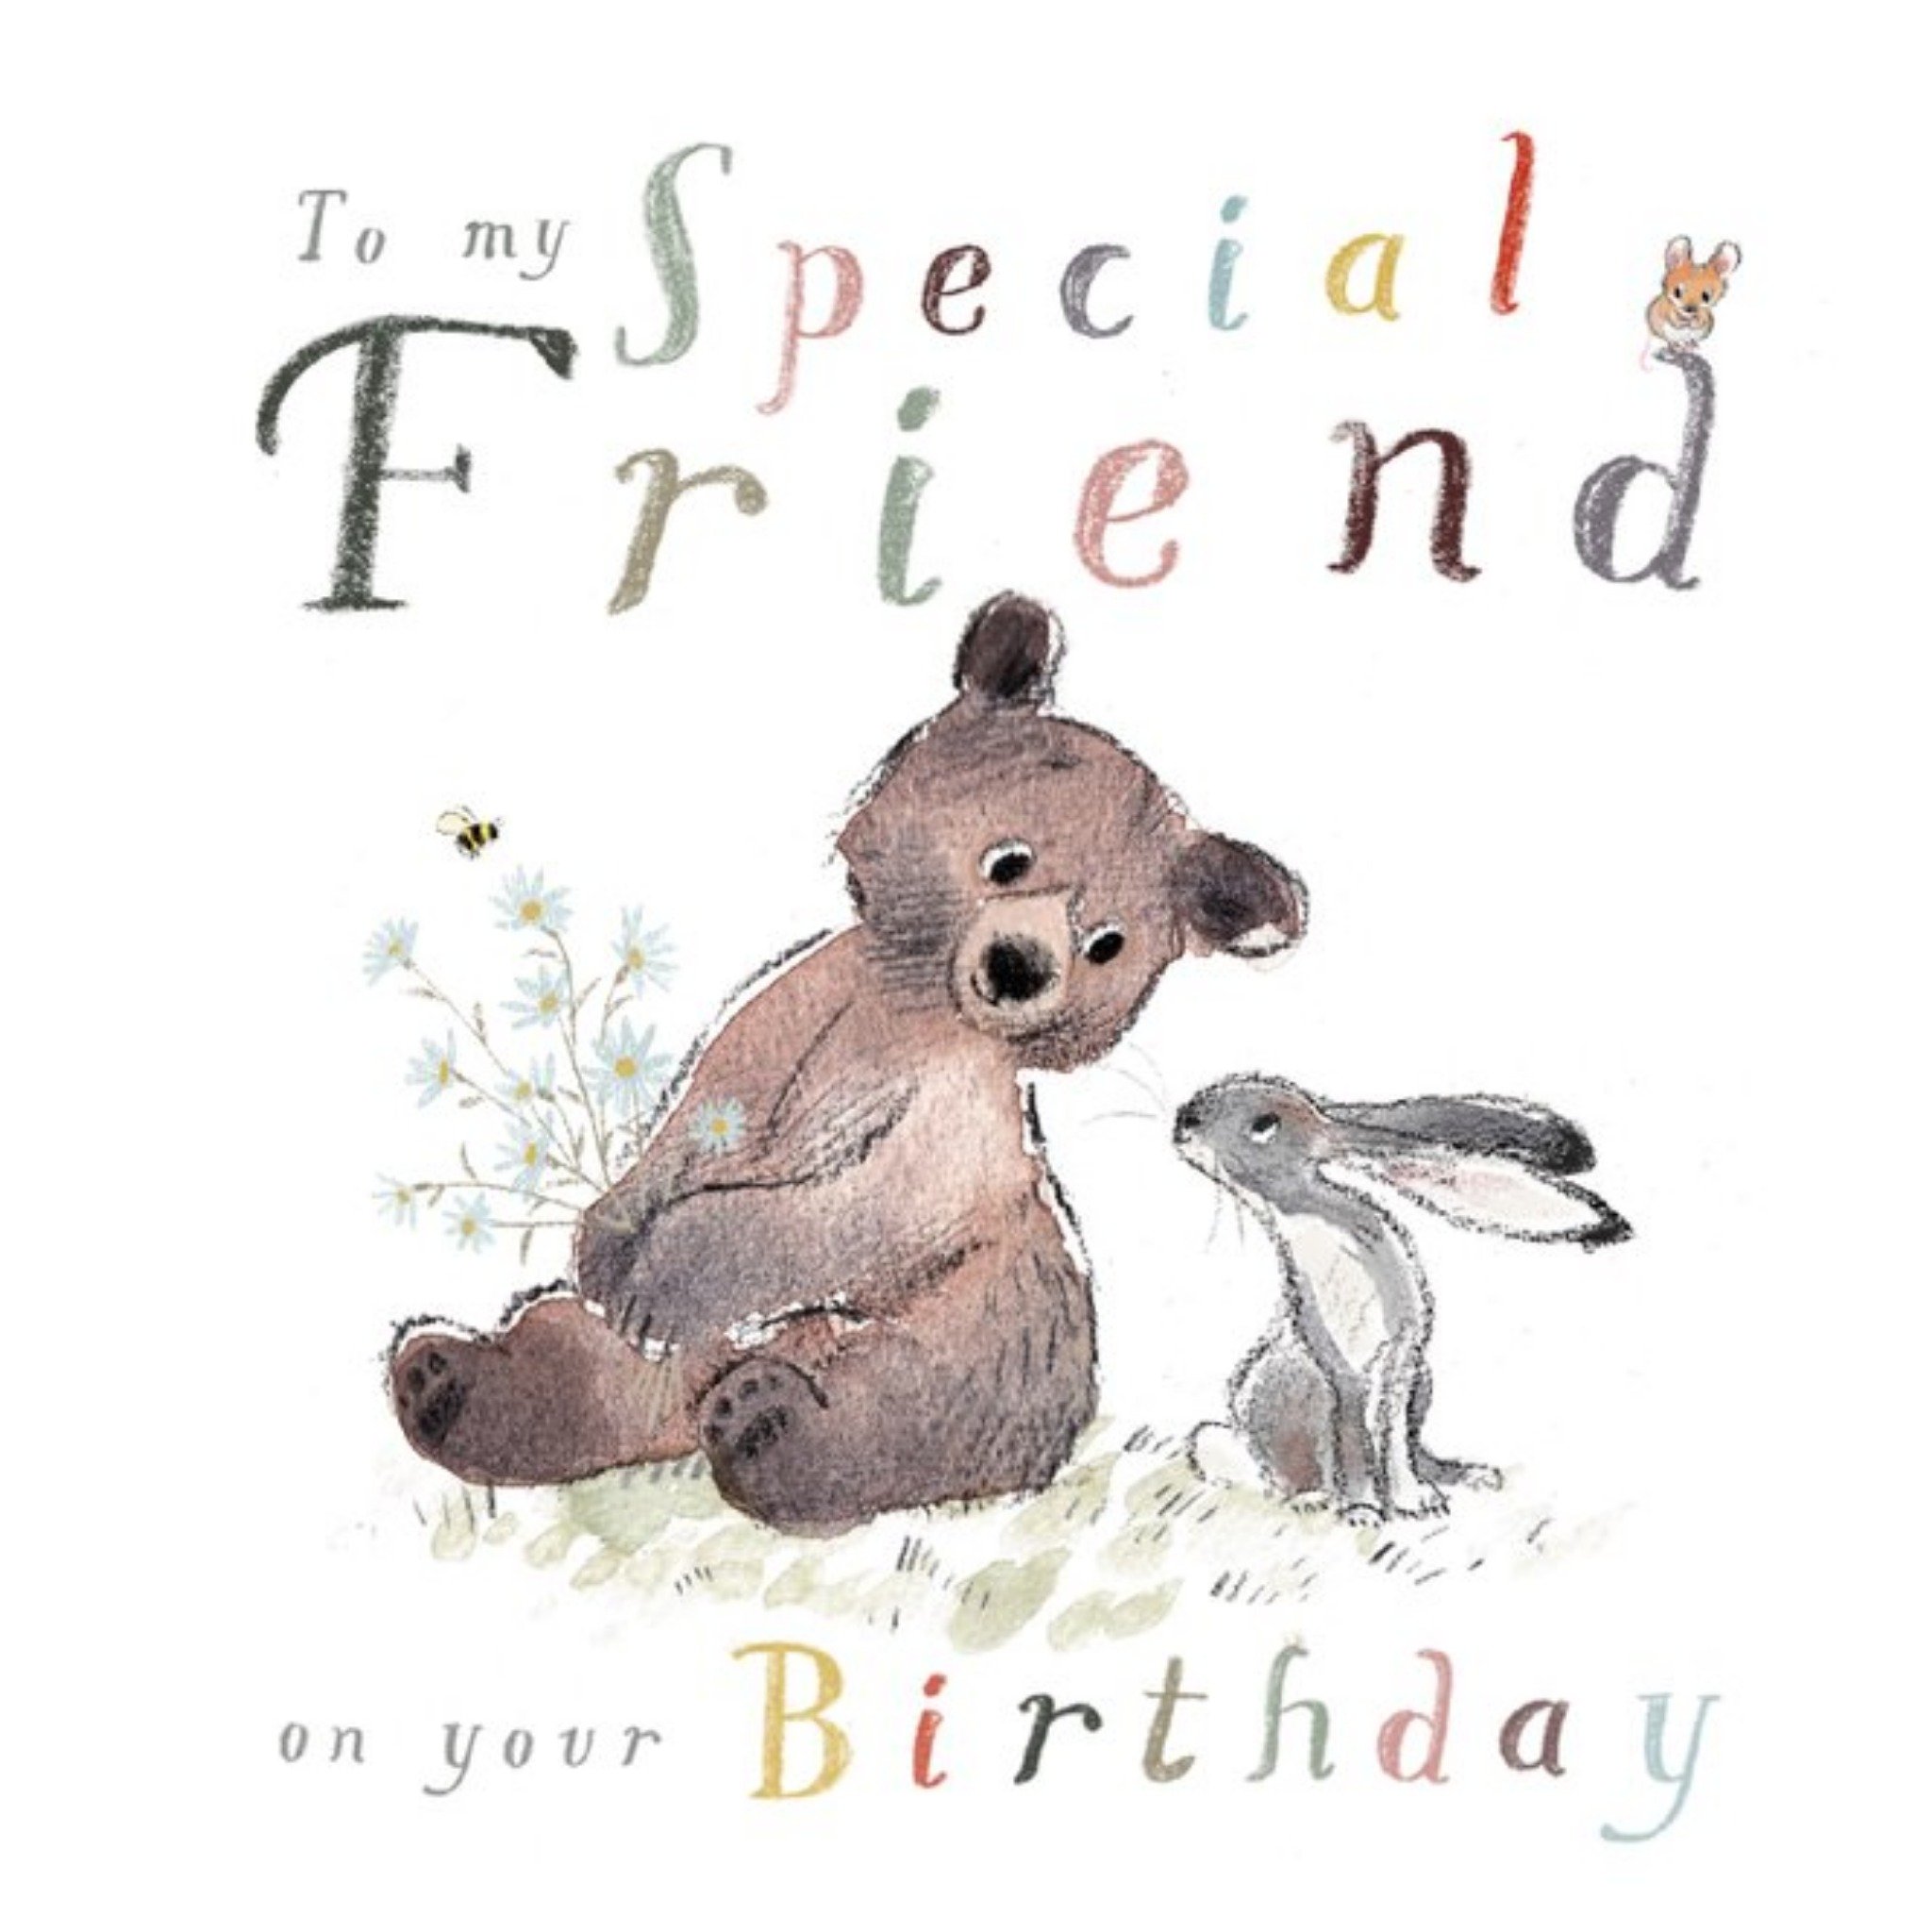 Moonpig Illustration Of A Cute Bear And A Hare To My Special Friend Birthday Card, Square